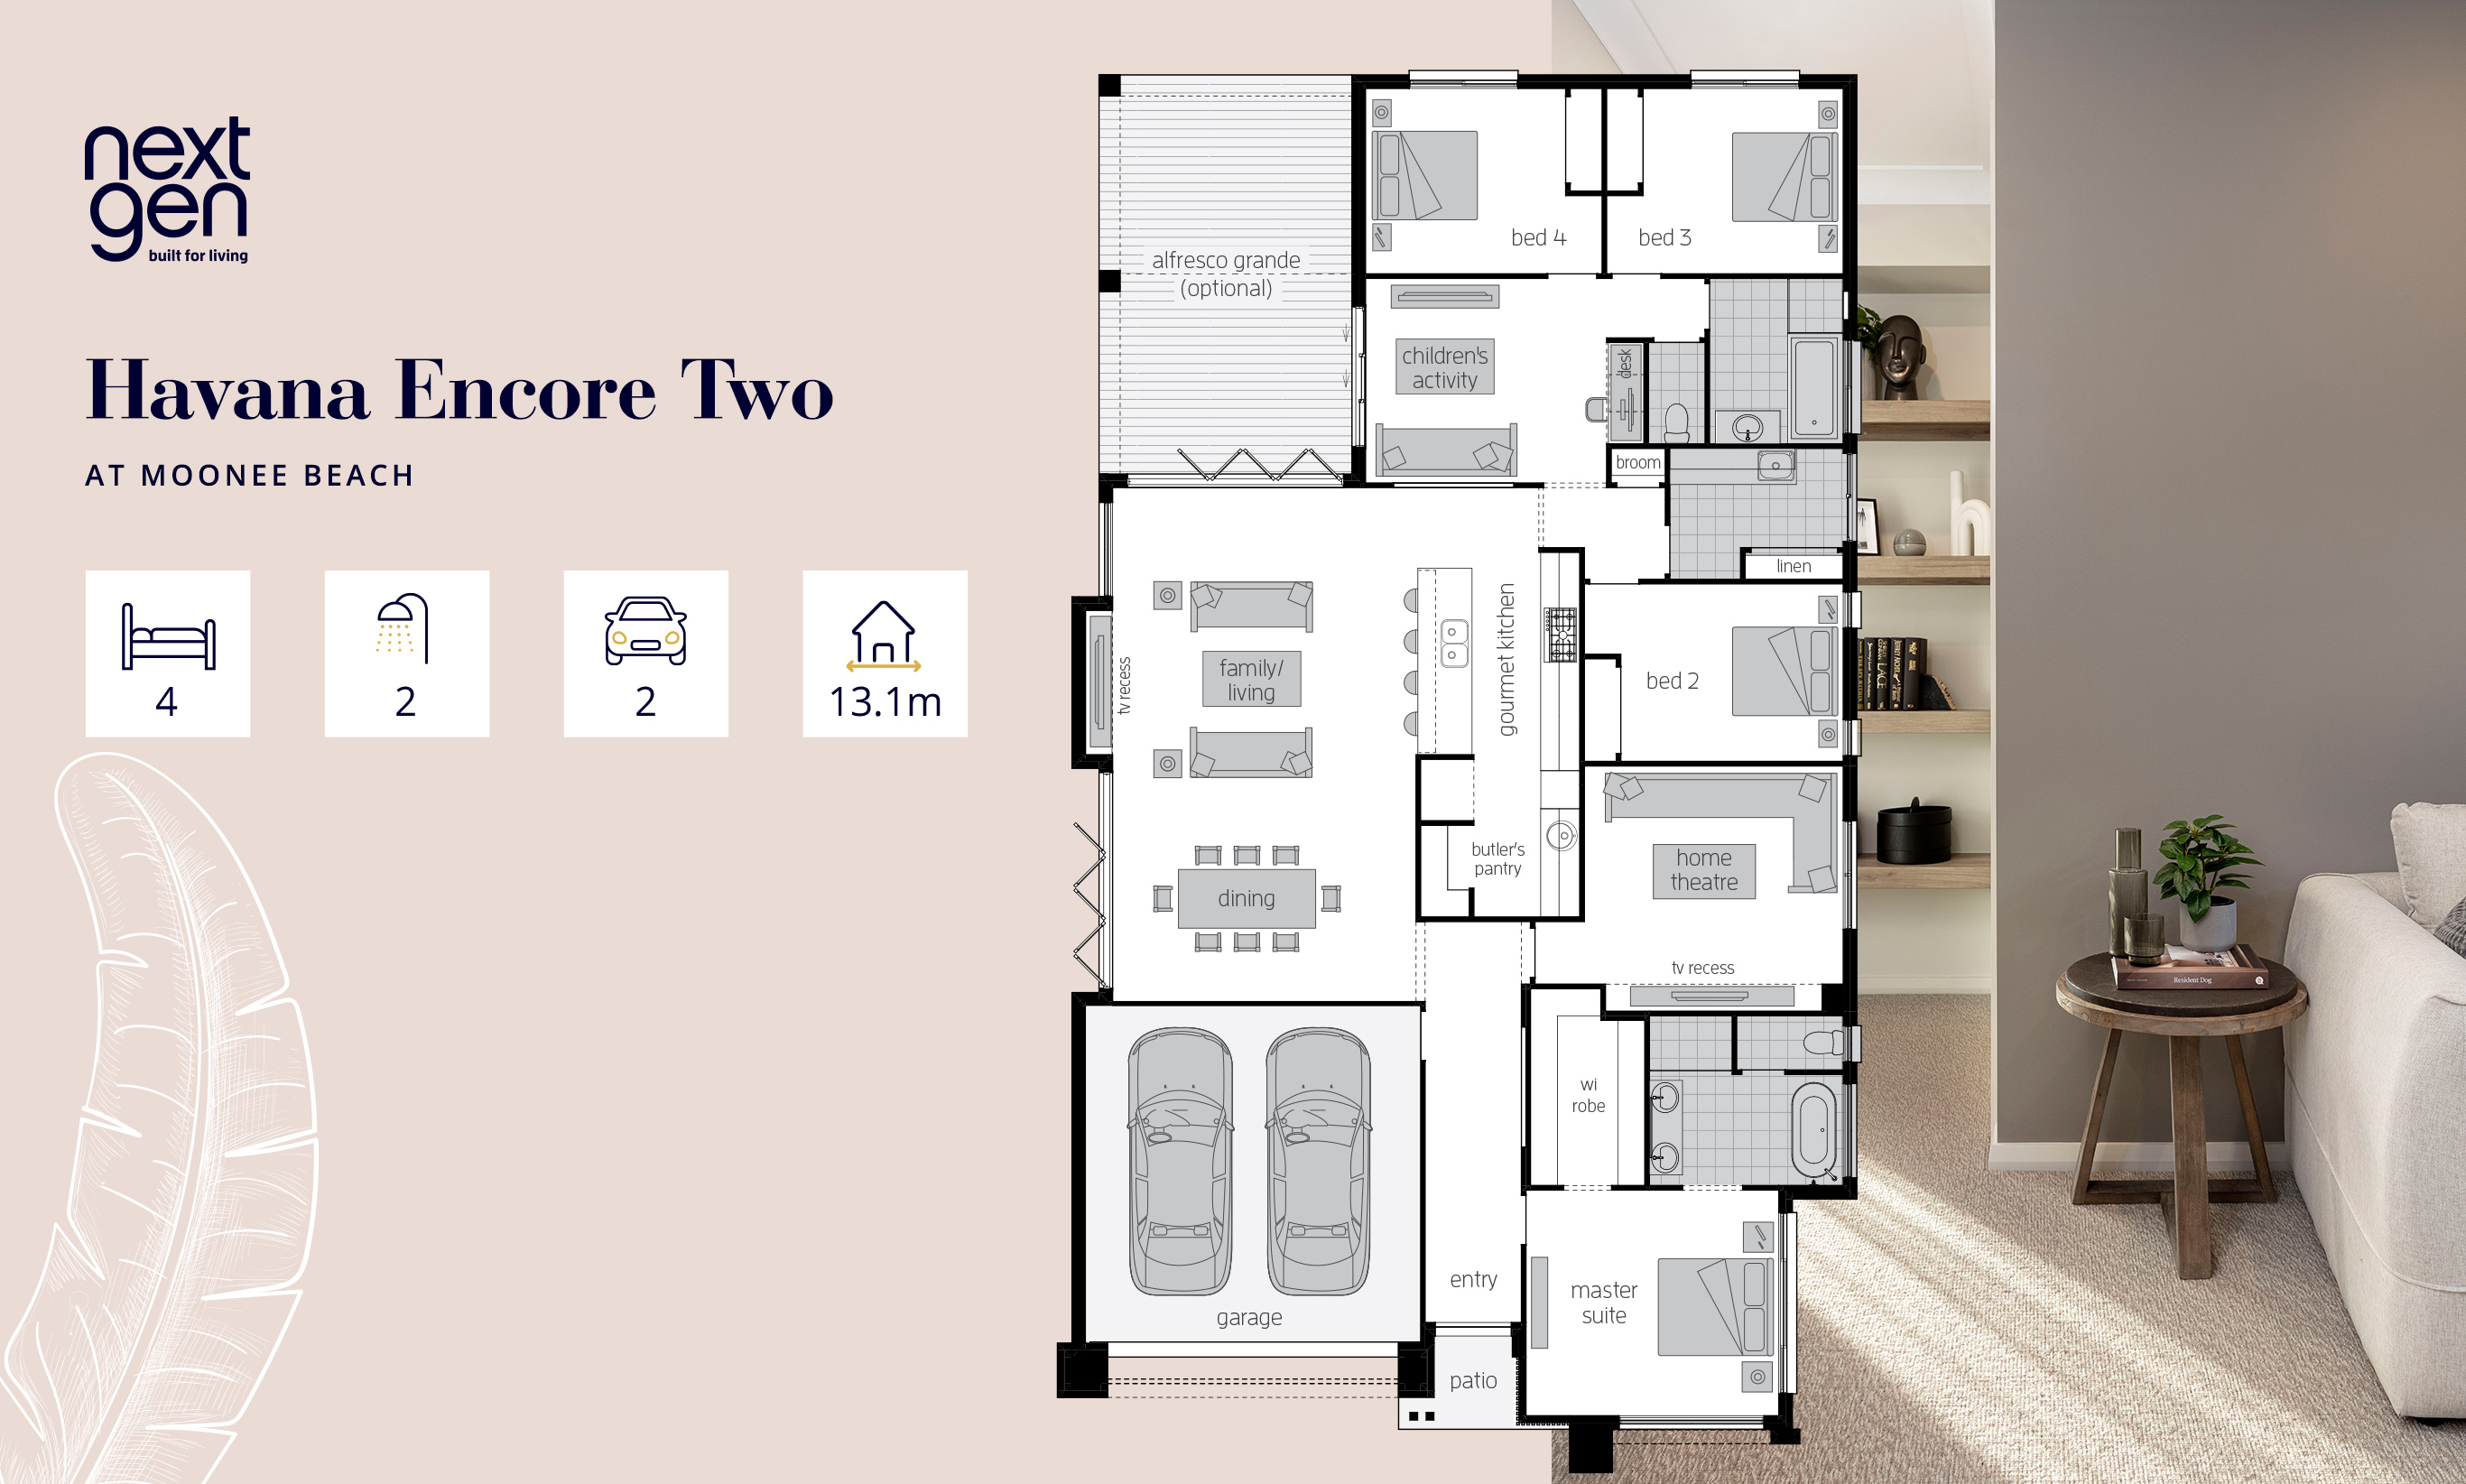 The Havana Encore Two is a wonderful home with four Bedrooms and double garage.